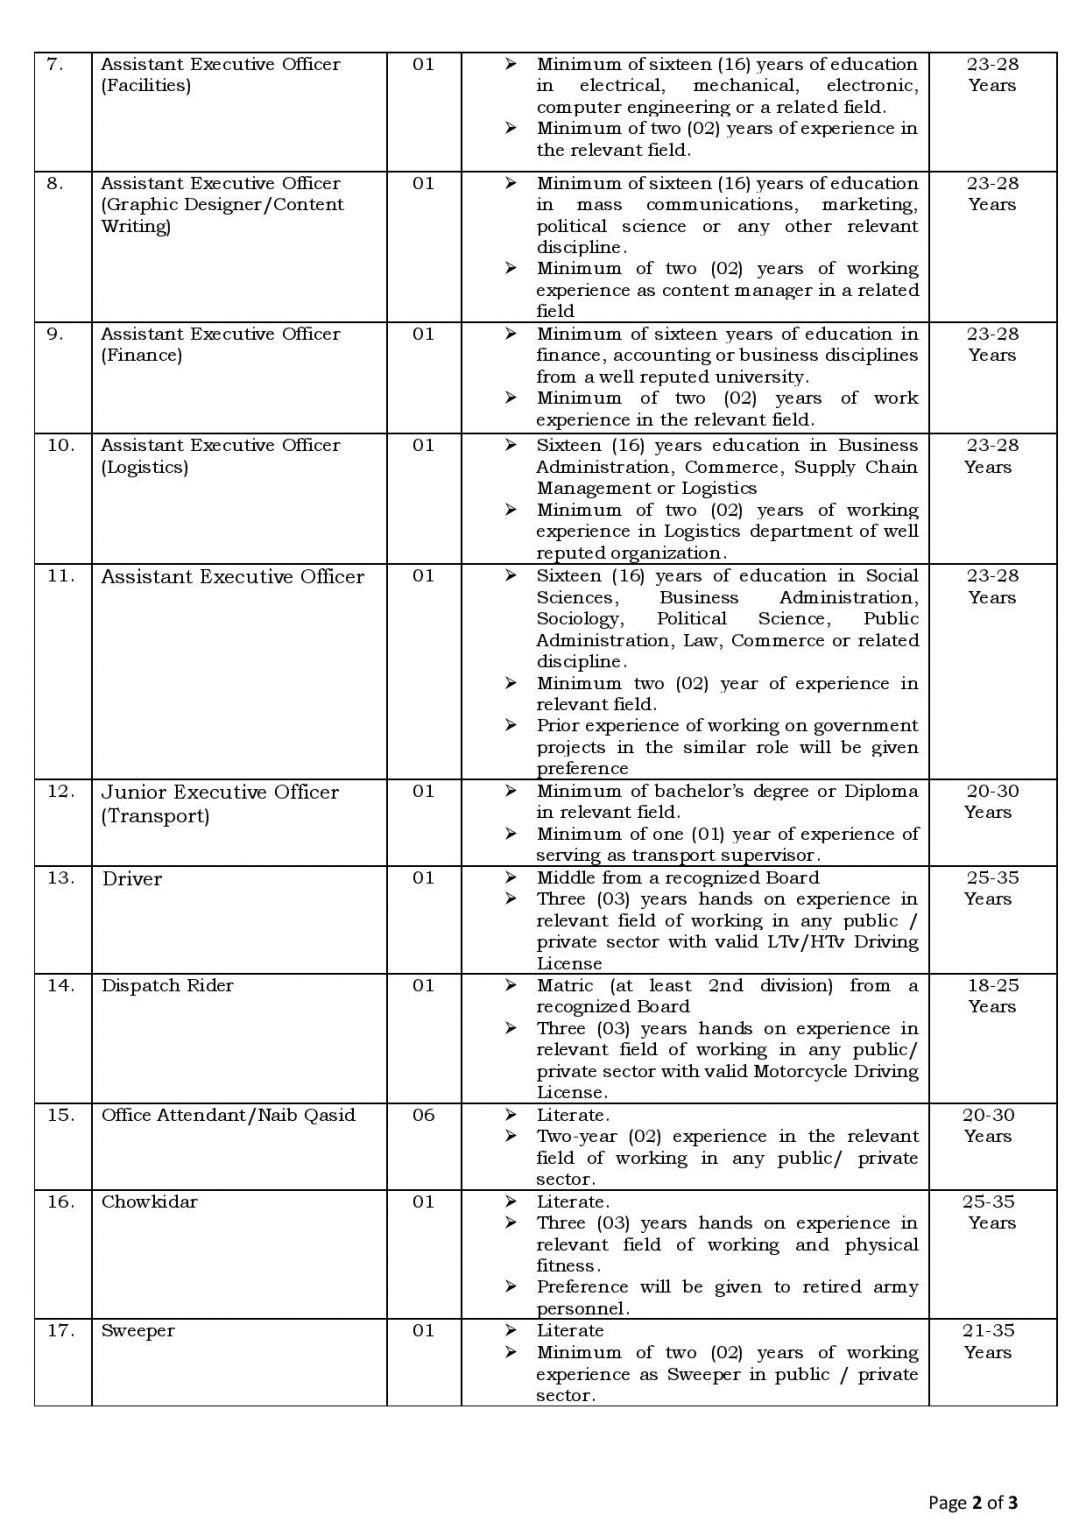 Punjab Police Safe Cities Authority PSCA Jobs 2022